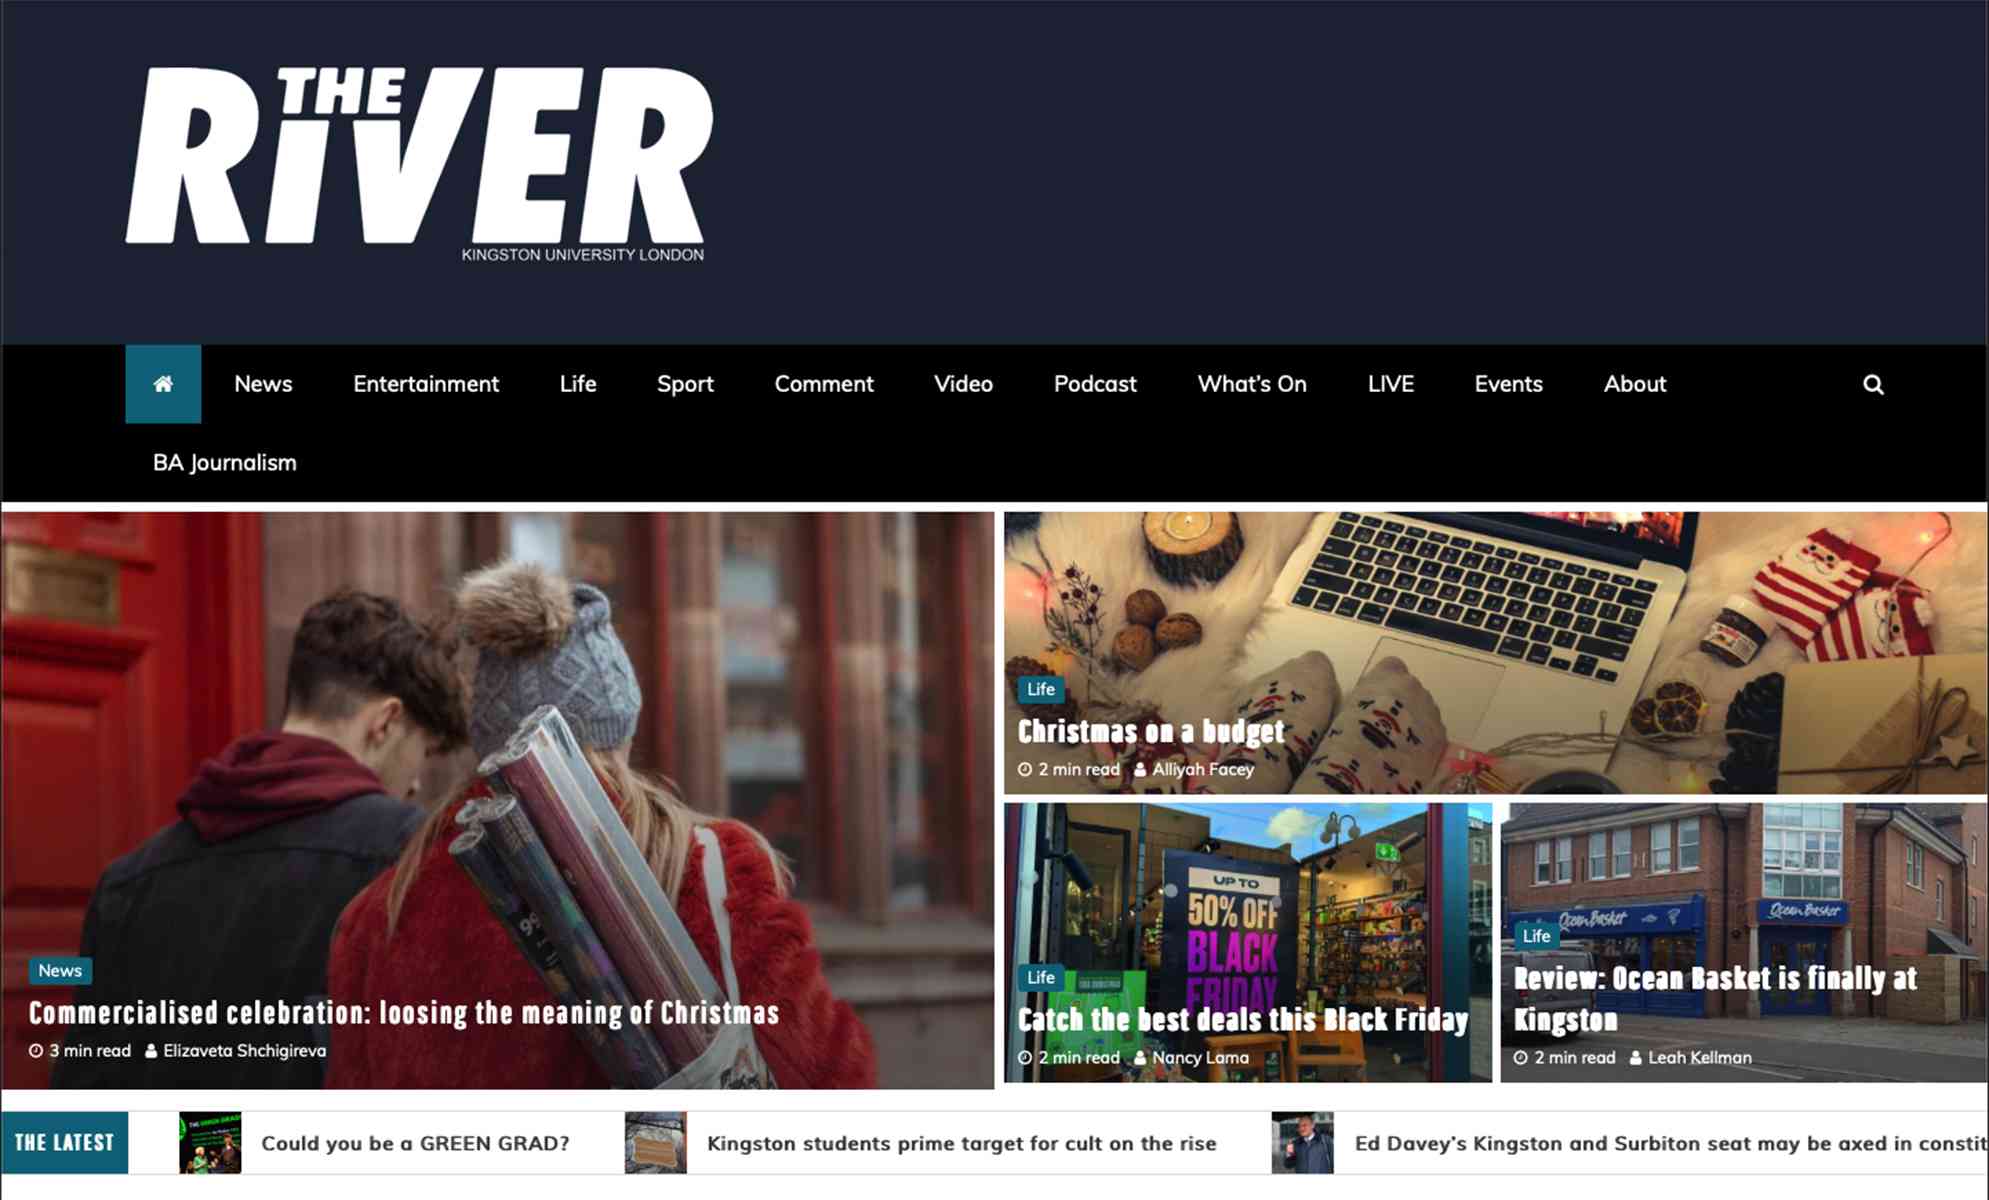 The River student newspaper website